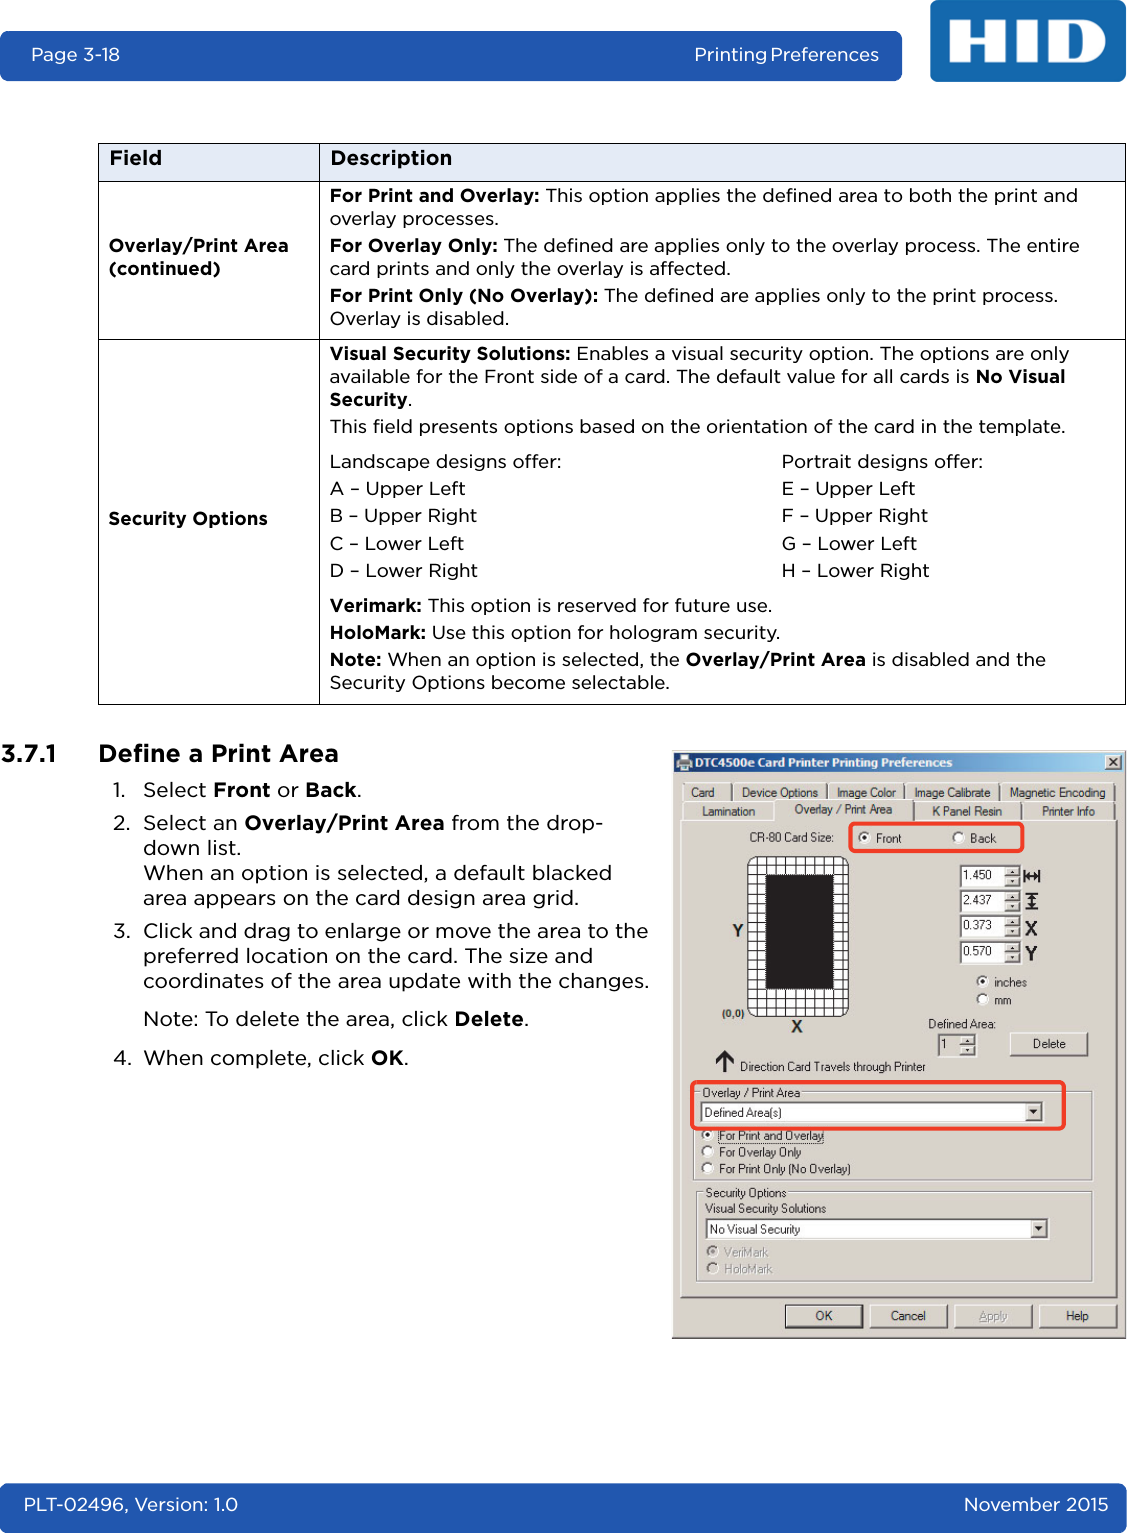 Page 3-18 Printing Preferences PLT-02496, Version: 1.0 November 20153.7.1 Define a Print Area1. Select Front or Back.2. Select an Overlay/Print Area from the drop-down list.When an option is selected, a default blacked area appears on the card design area grid.3. Click and drag to enlarge or move the area to the preferred location on the card. The size and coordinates of the area update with the changes.Note: To delete the area, click Delete.4. When complete, click OK.Overlay/Print Area (continued)For Print and Overlay: This option applies the defined area to both the print and overlay processes.For Overlay Only: The defined are applies only to the overlay process. The entire card prints and only the overlay is affected.For Print Only (No Overlay): The defined are applies only to the print process. Overlay is disabled.Security OptionsVisual Security Solutions: Enables a visual security option. The options are only available for the Front side of a card. The default value for all cards is No Visual Security.This field presents options based on the orientation of the card in the template.Landscape designs offer:A – Upper LeftB – Upper RightC – Lower LeftD – Lower RightPortrait designs offer:E – Upper LeftF – Upper RightG – Lower LeftH – Lower RightVerimark: This option is reserved for future use.HoloMark: Use this option for hologram security.Note: When an option is selected, the Overlay/Print Area is disabled and the Security Options become selectable.Field Description